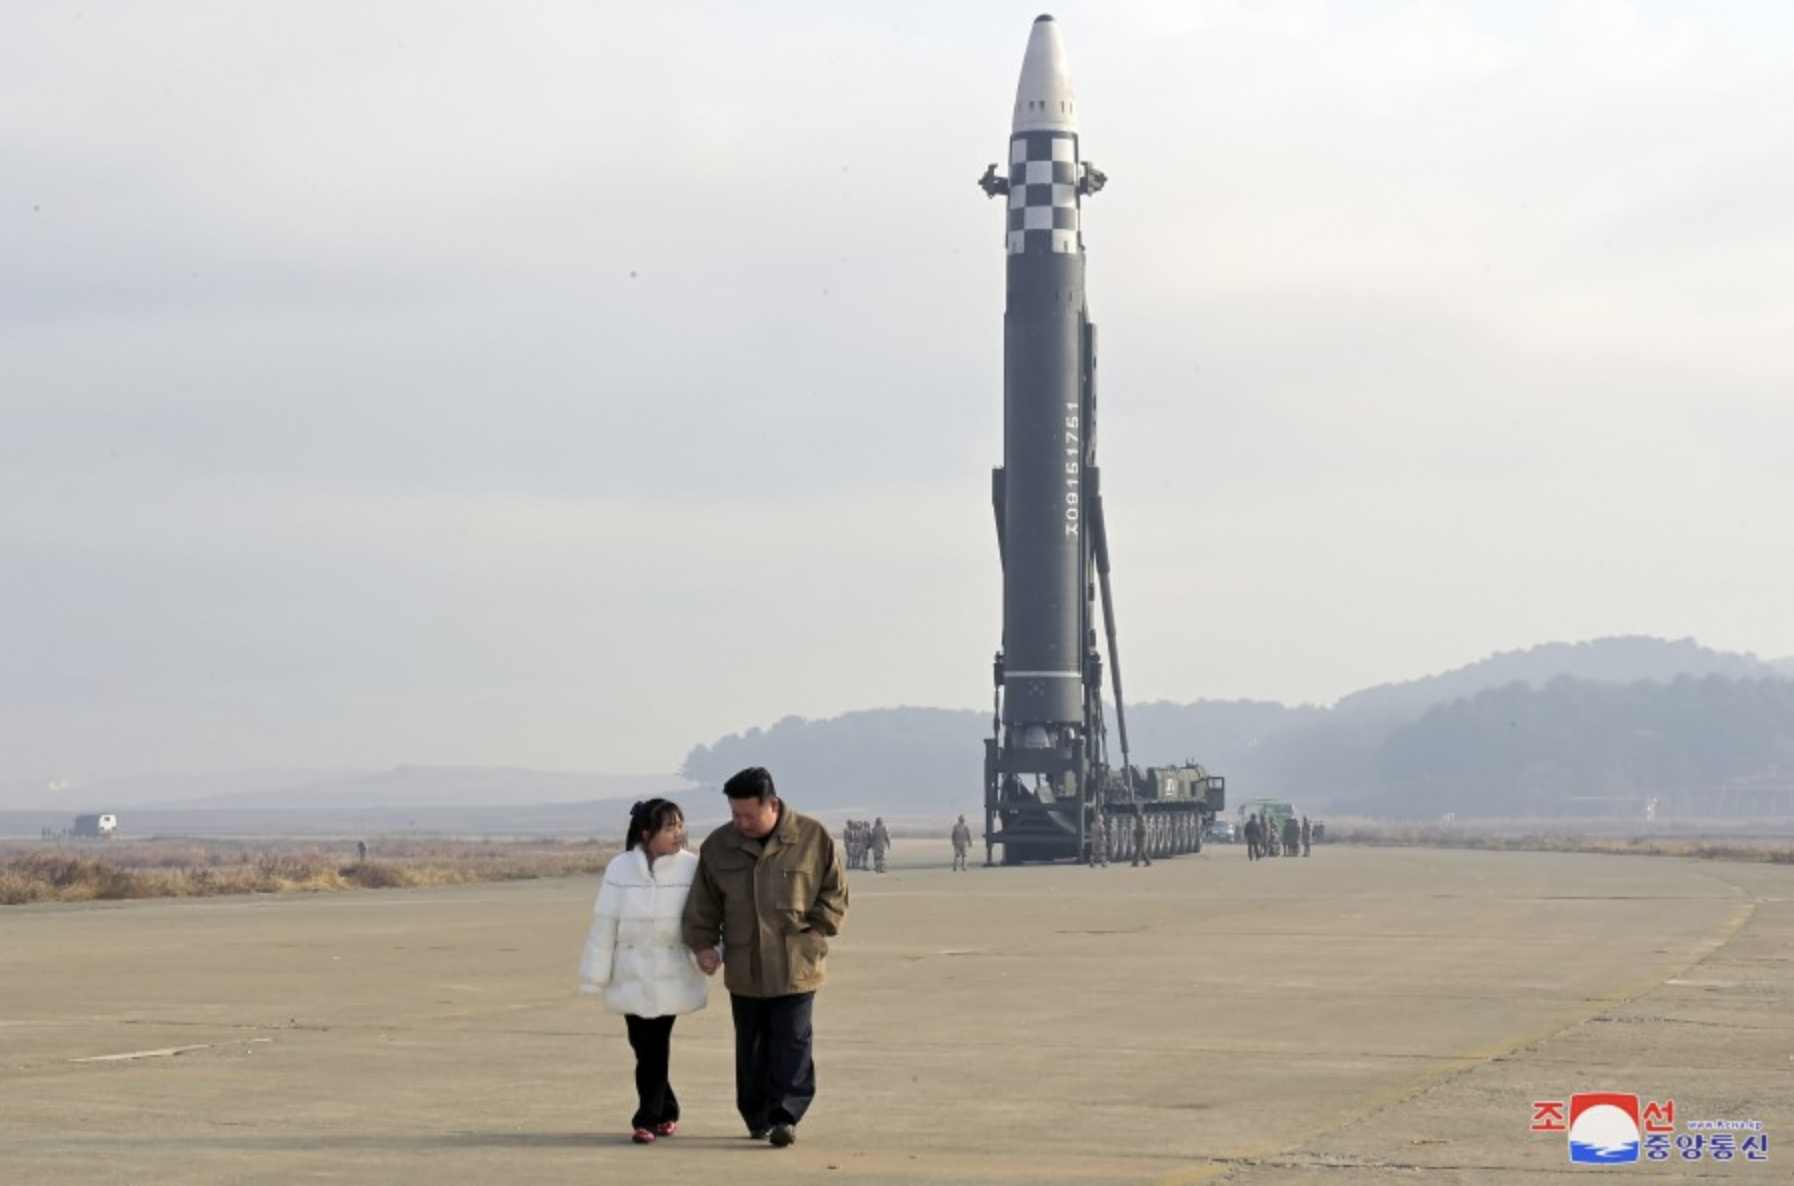 Kim and his daughter walking away from the missile launch